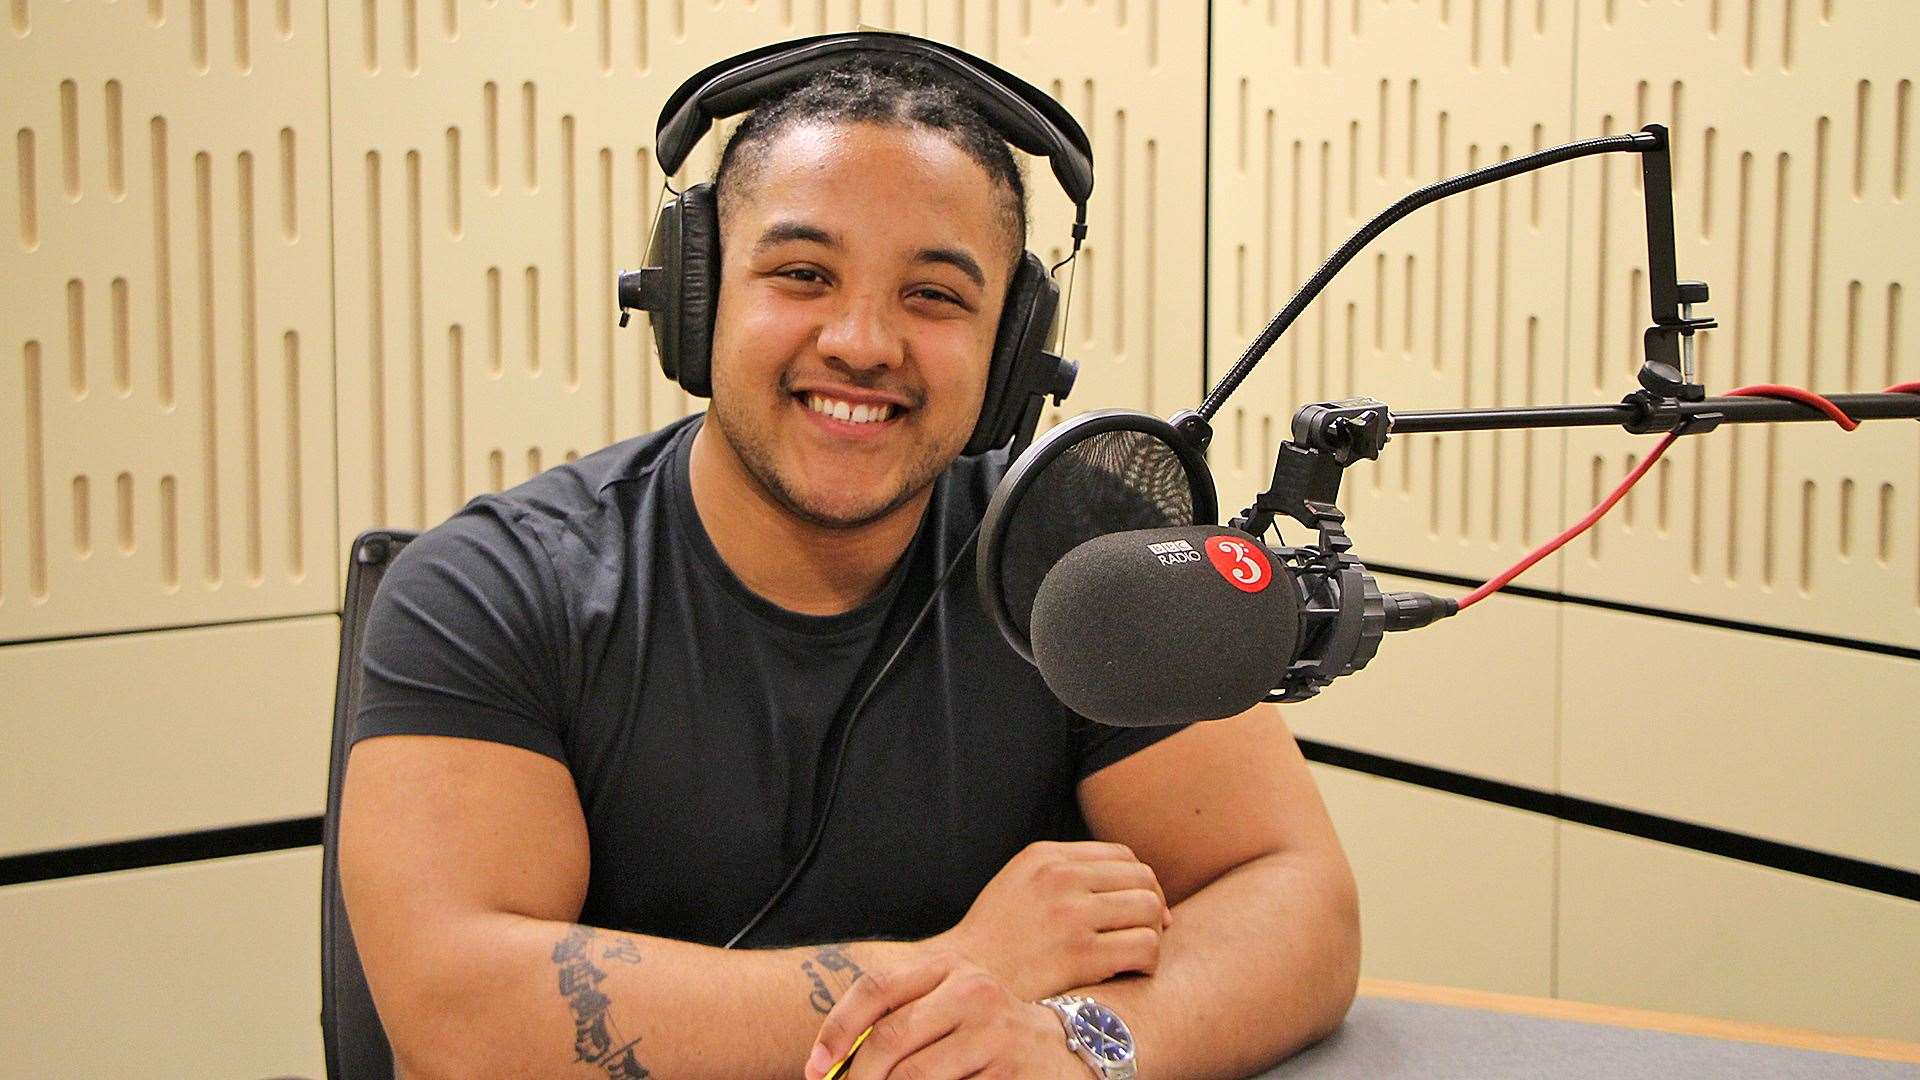 Keelen Carew presenting Sounds Connected, his new show on Radio 3